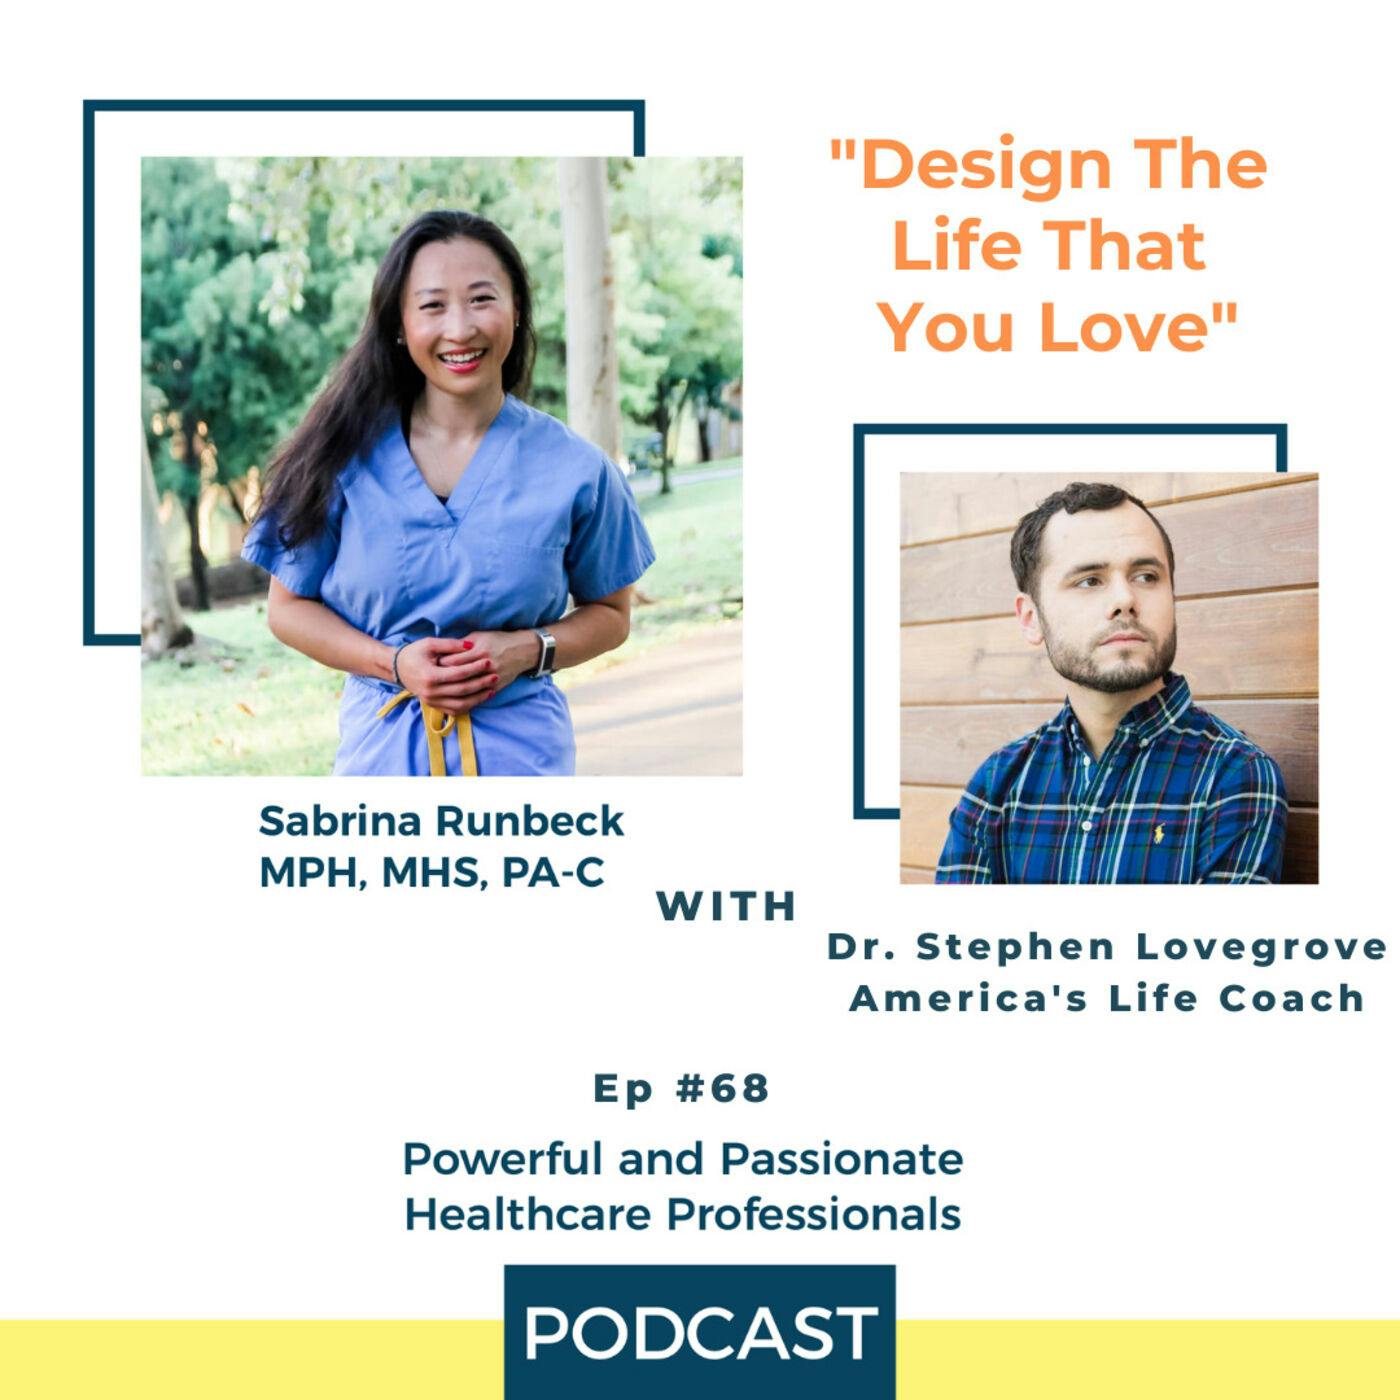 Ep 68 – Design The Life That You Love with Dr. Stephen Lovegrove